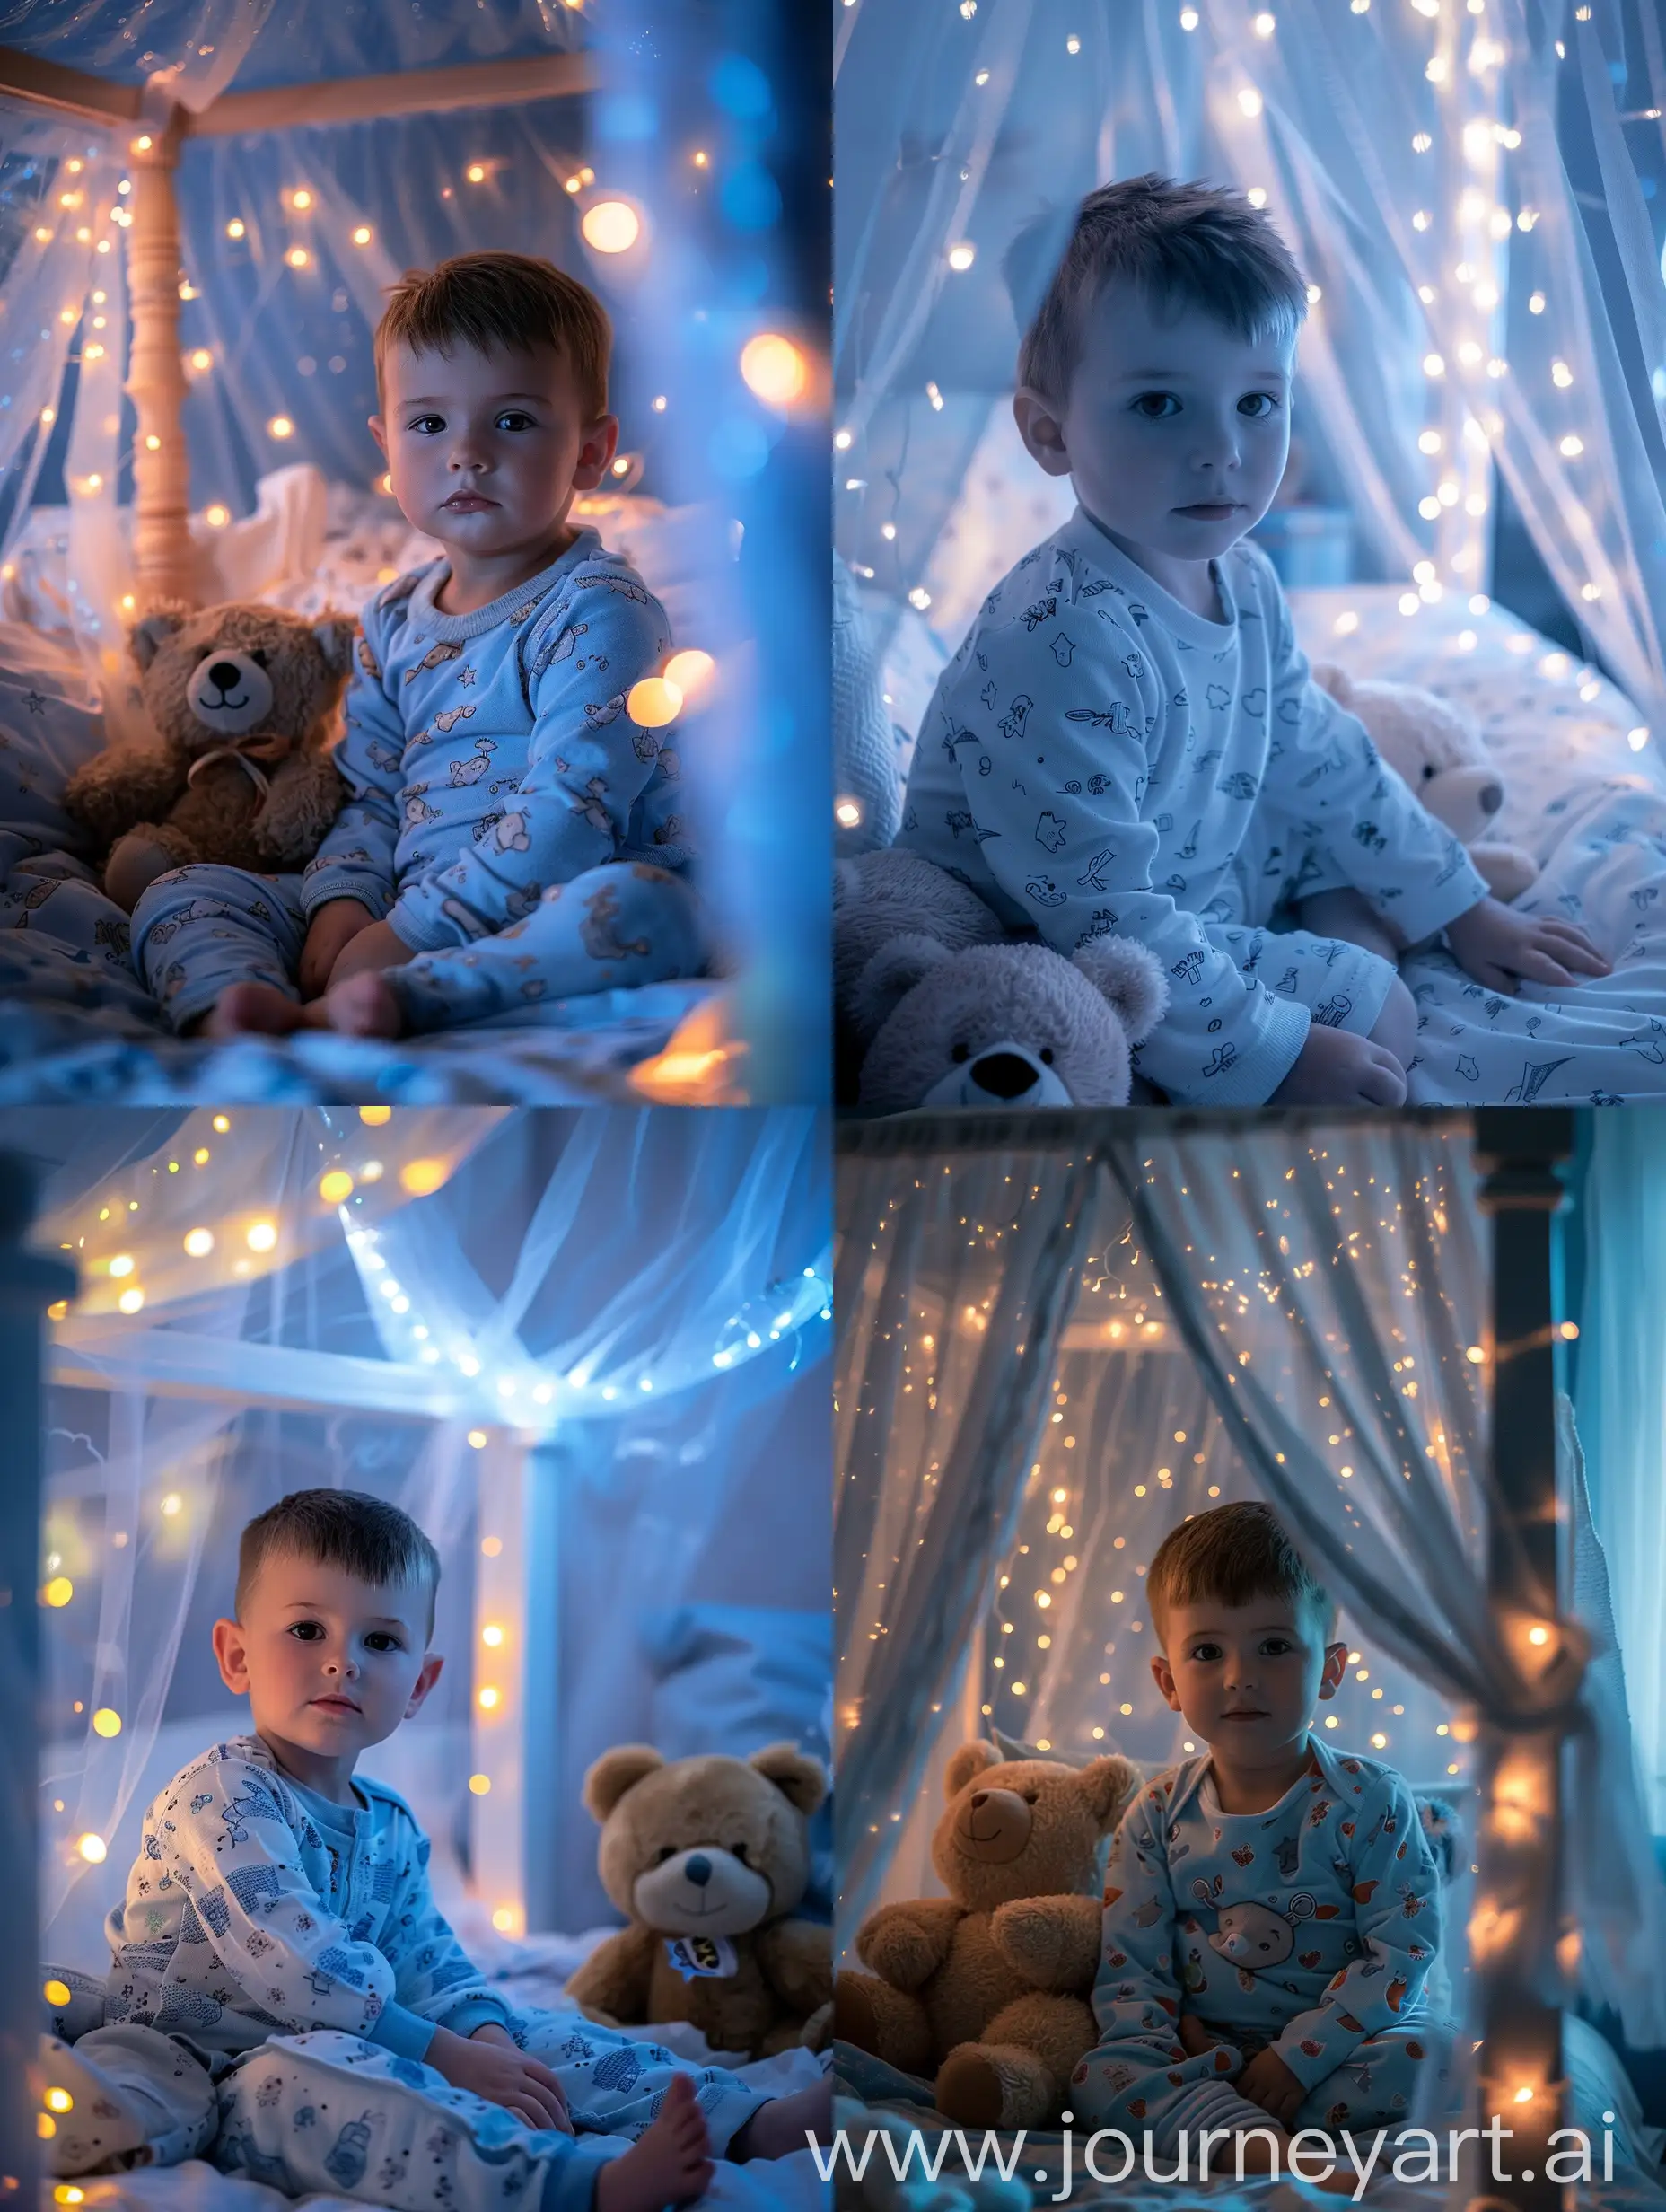 Child-in-Pajamas-Sitting-on-Glowing-Canopy-Bed-with-Teddy-Bear